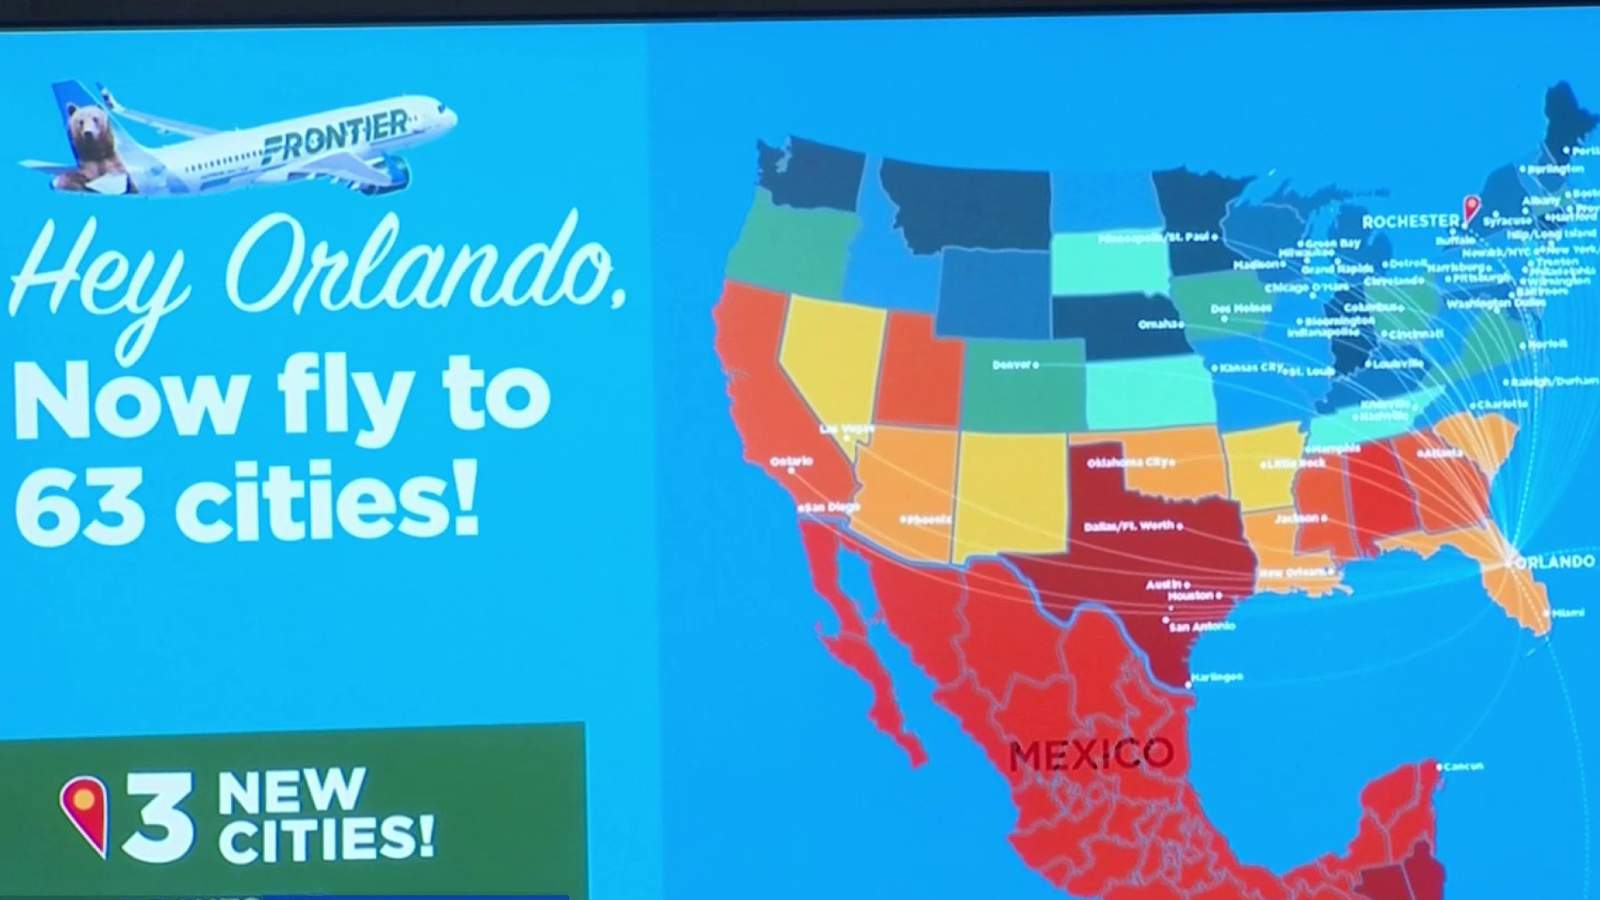 Frontier Airlines announces 2 new nonstop destinations out of Orlando International Airport